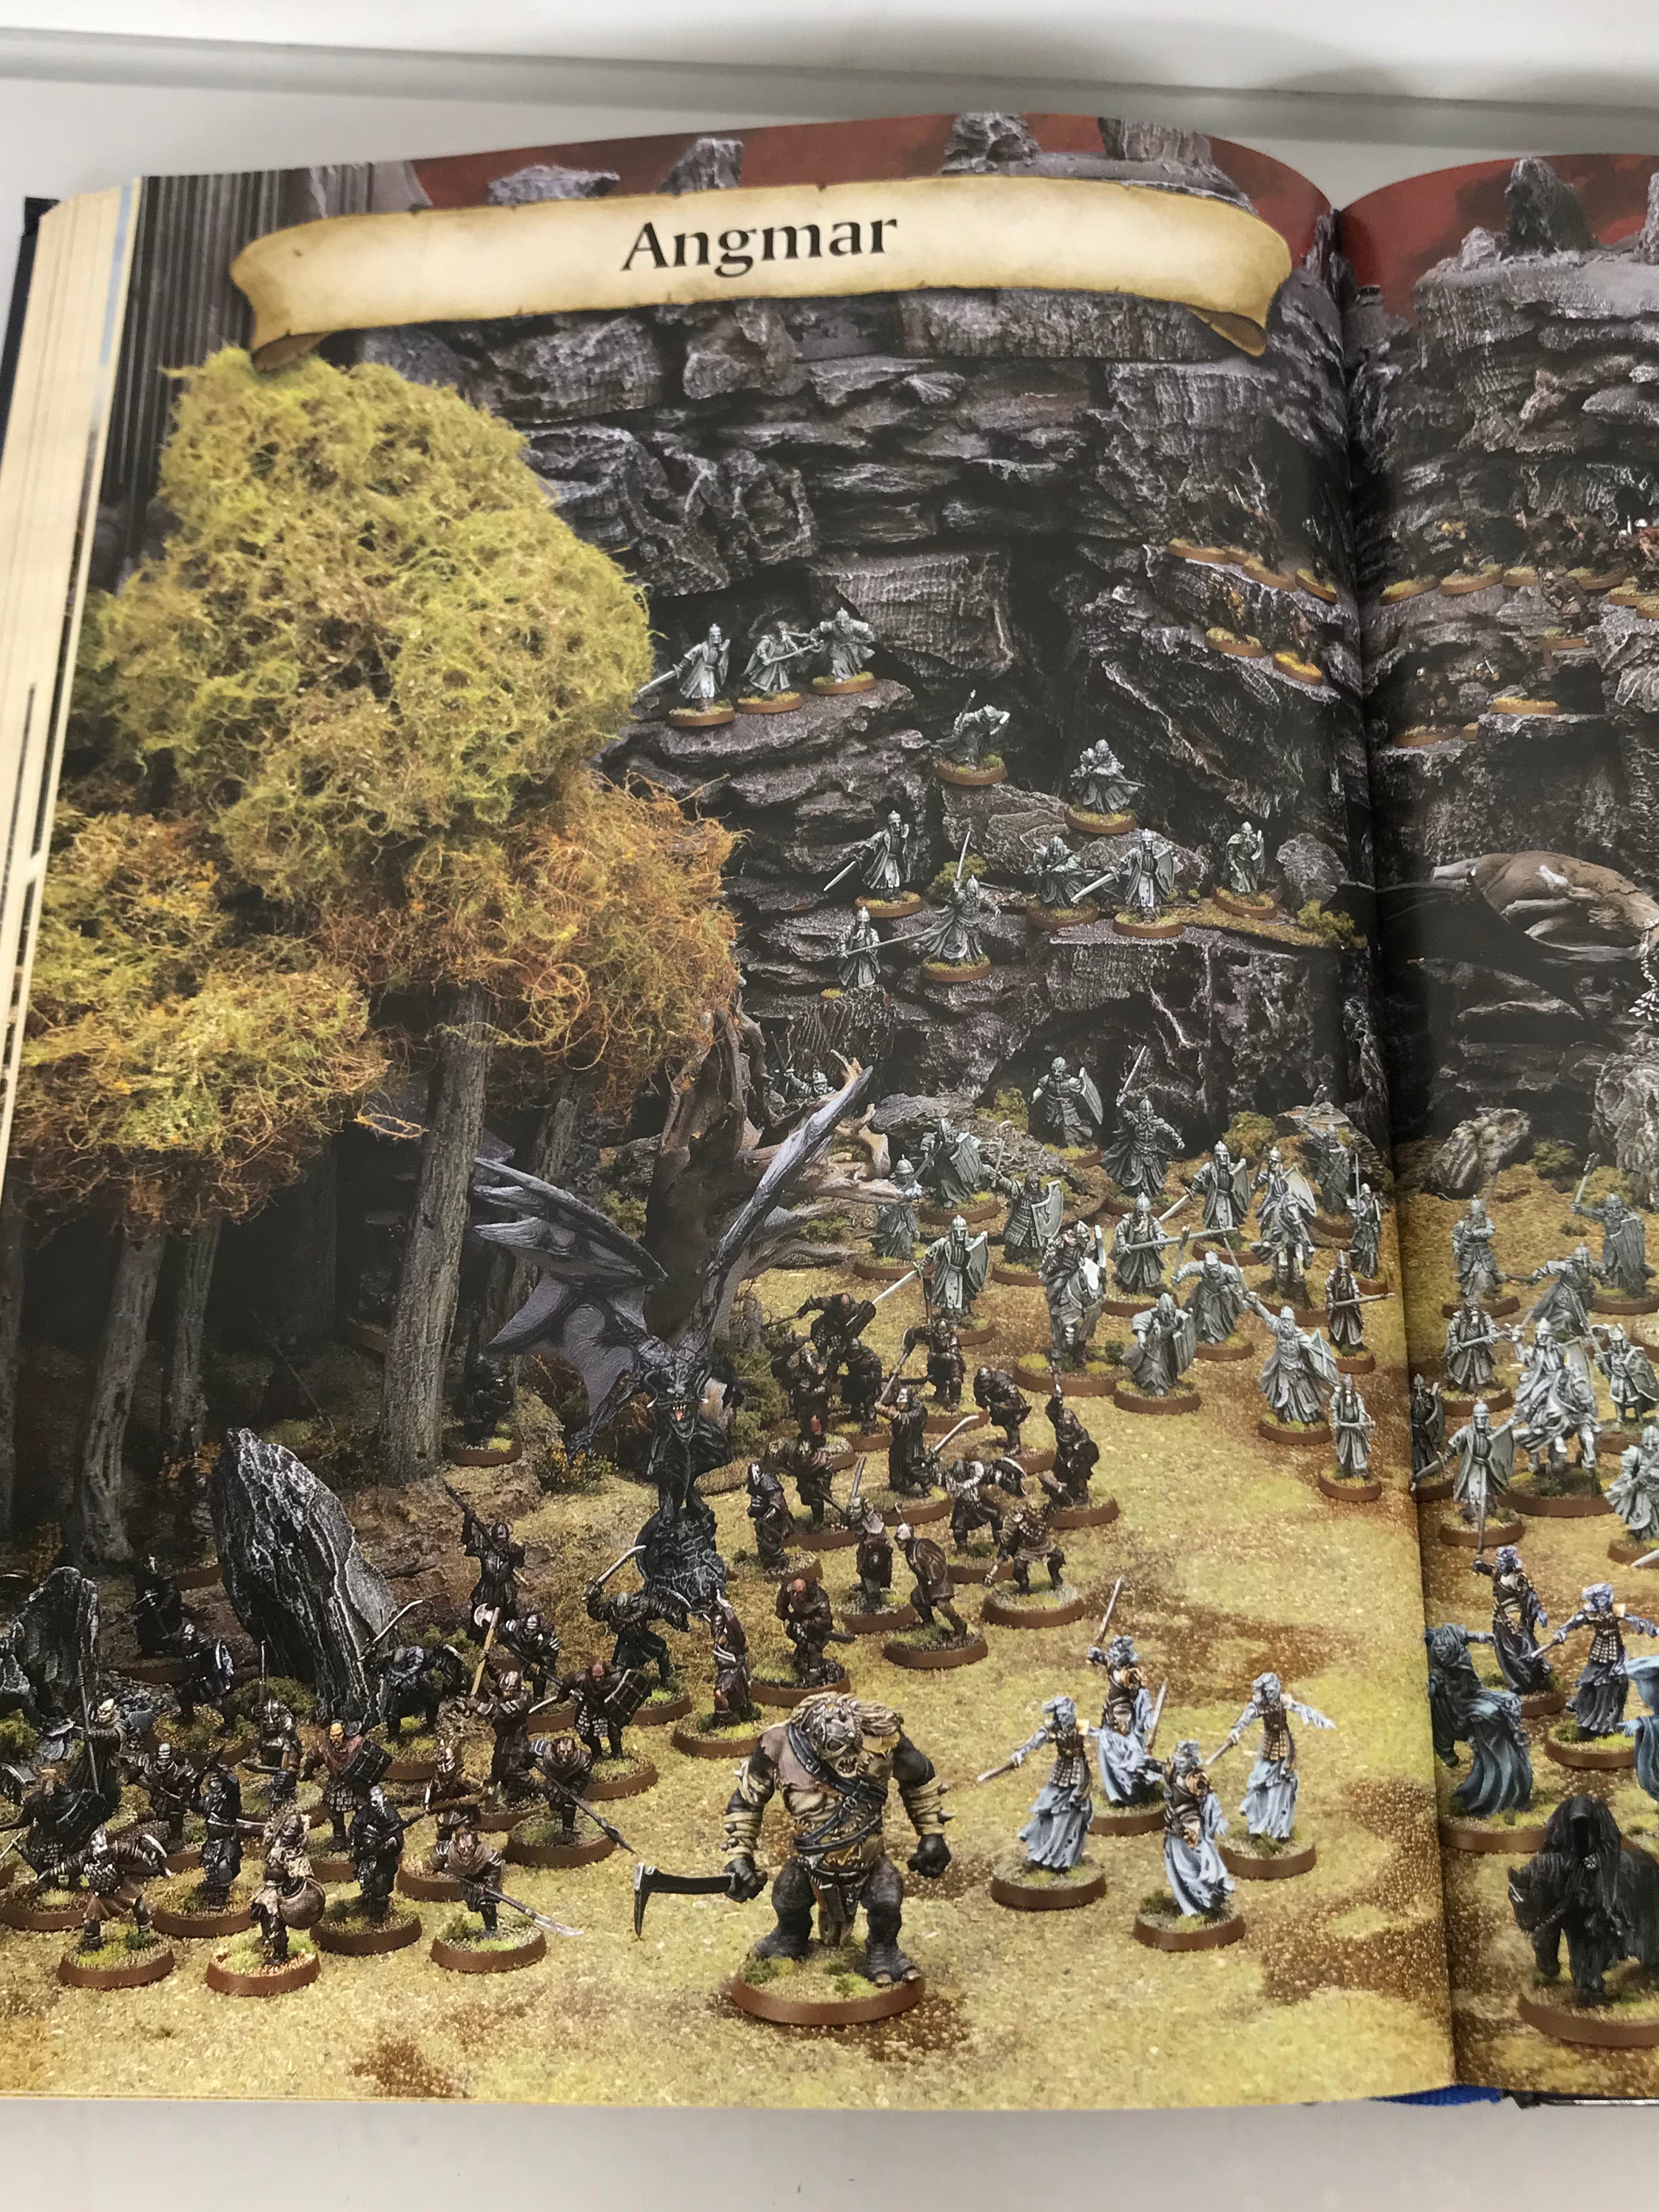 Lord of the Rings Games Workshop - Warhammer Lord of the Rings, Return of  the King book for table top wargaming Stock Photo - Alamy